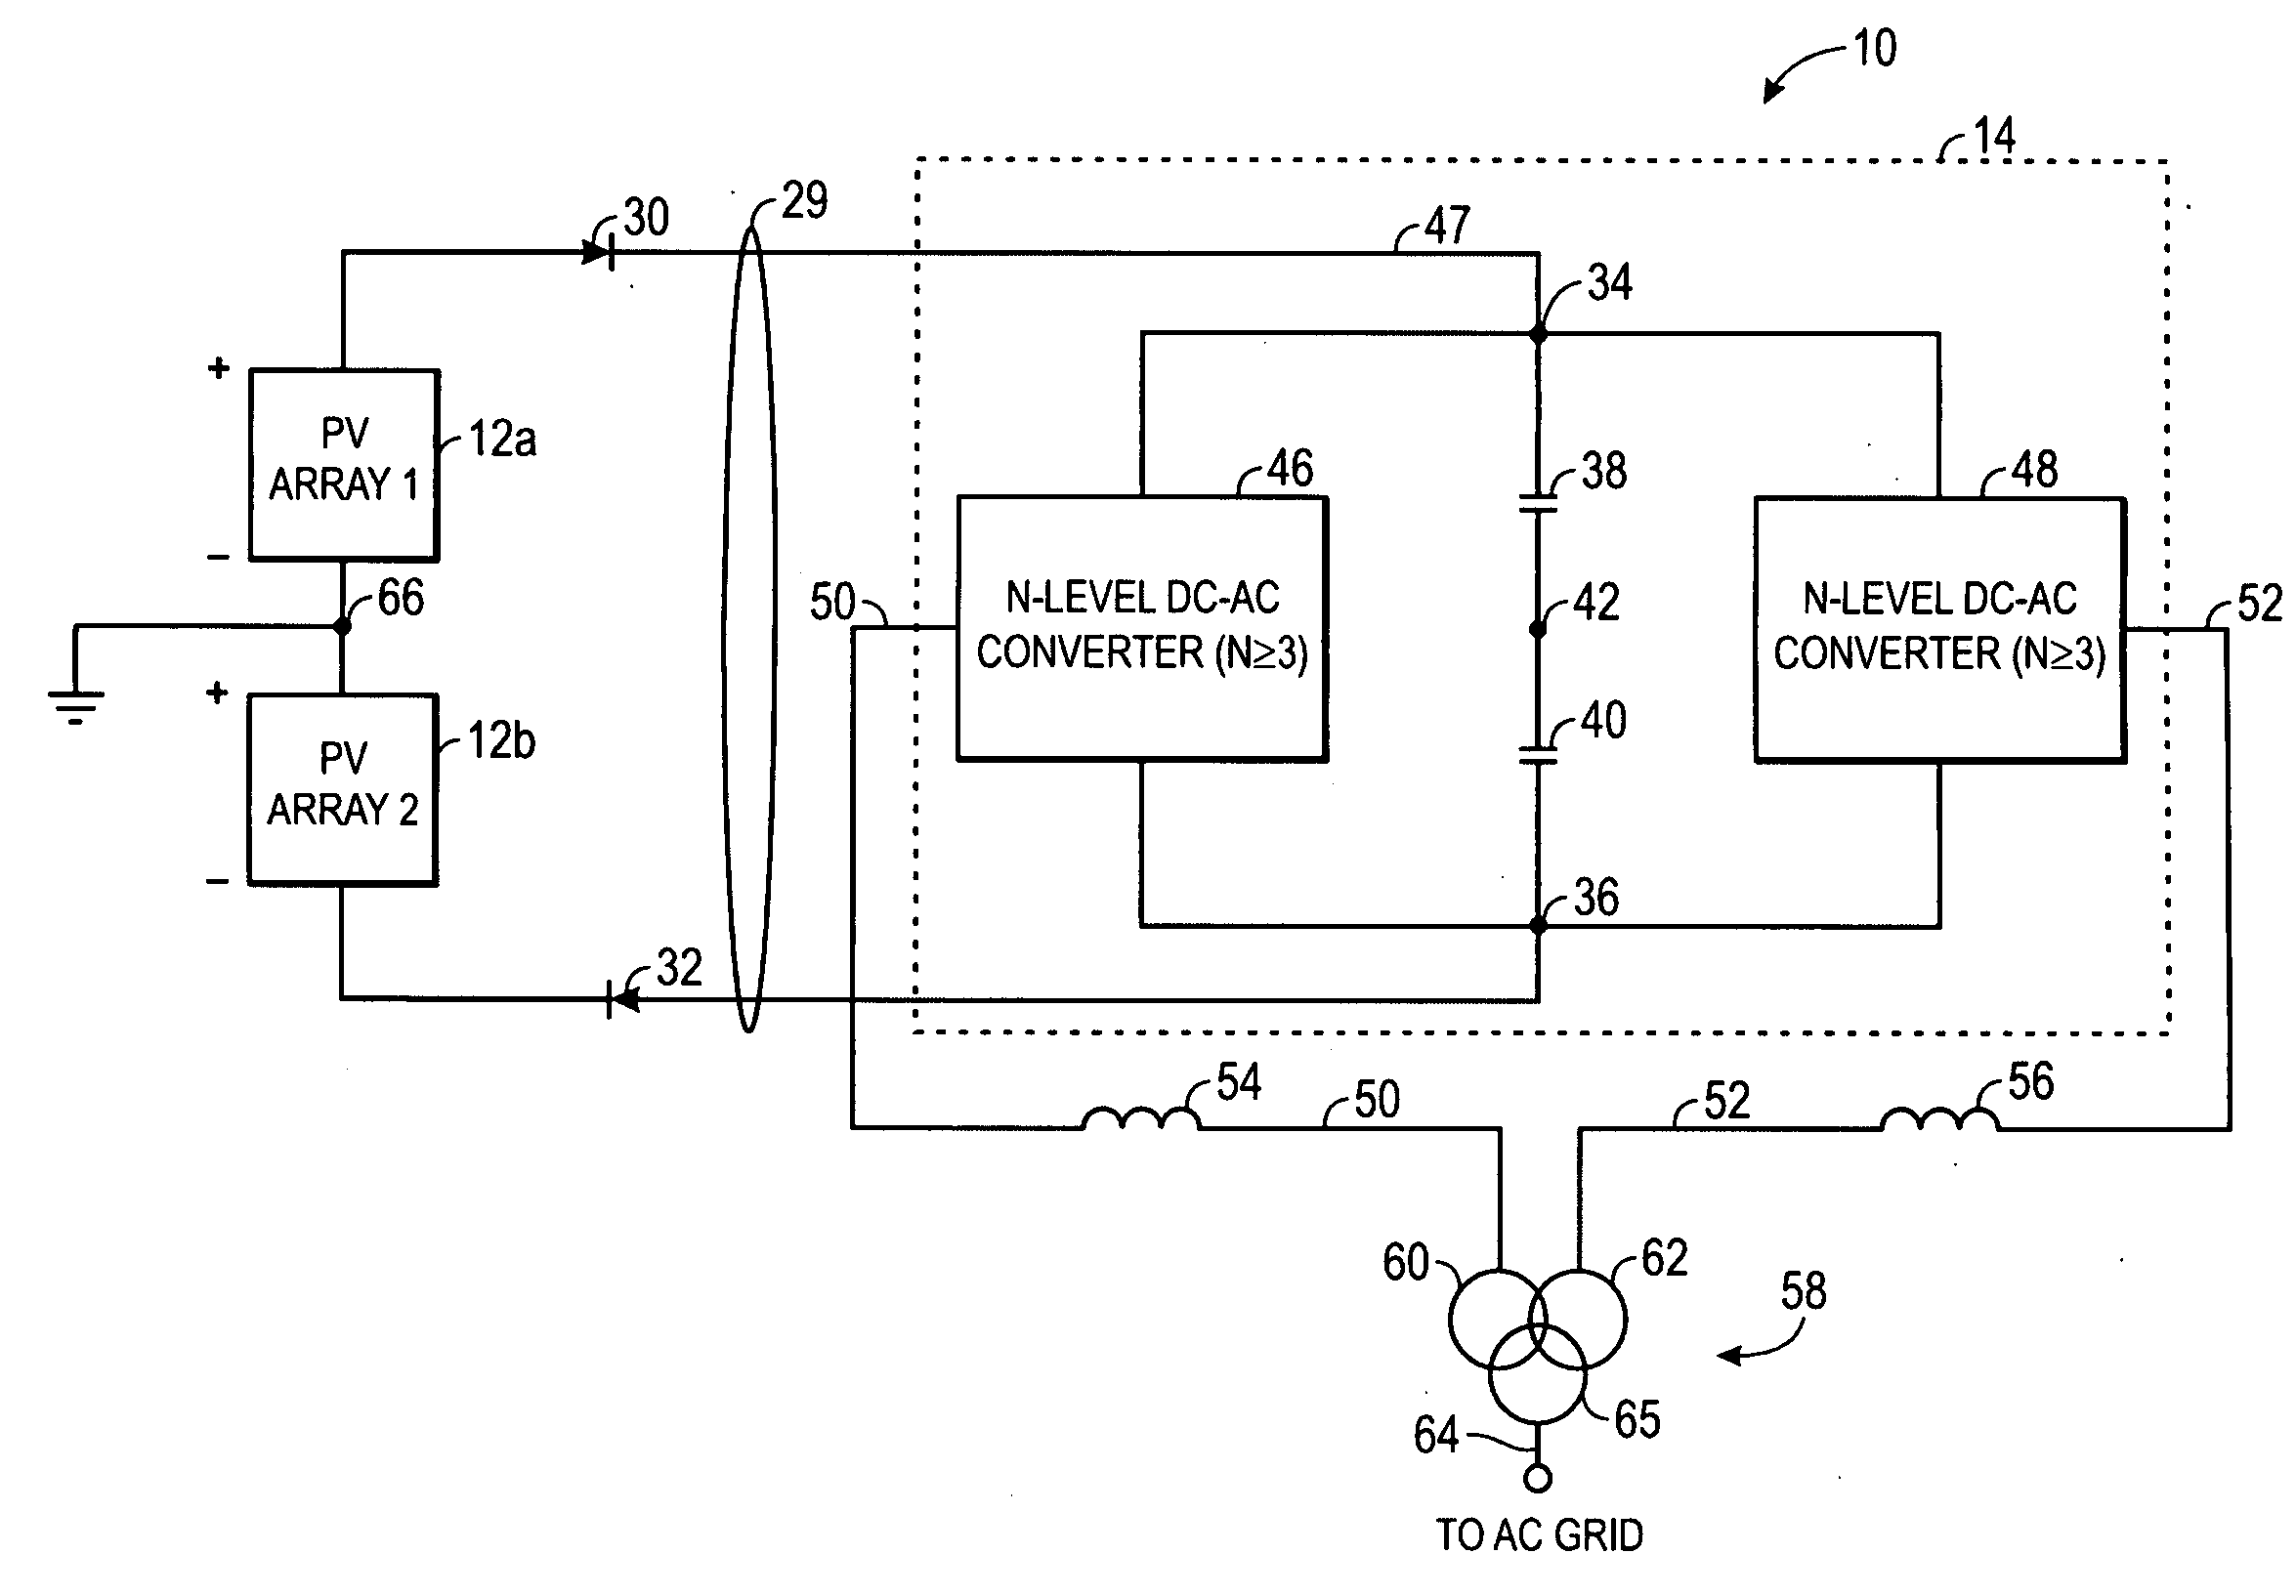 Dc-to-ac power conversion system and method